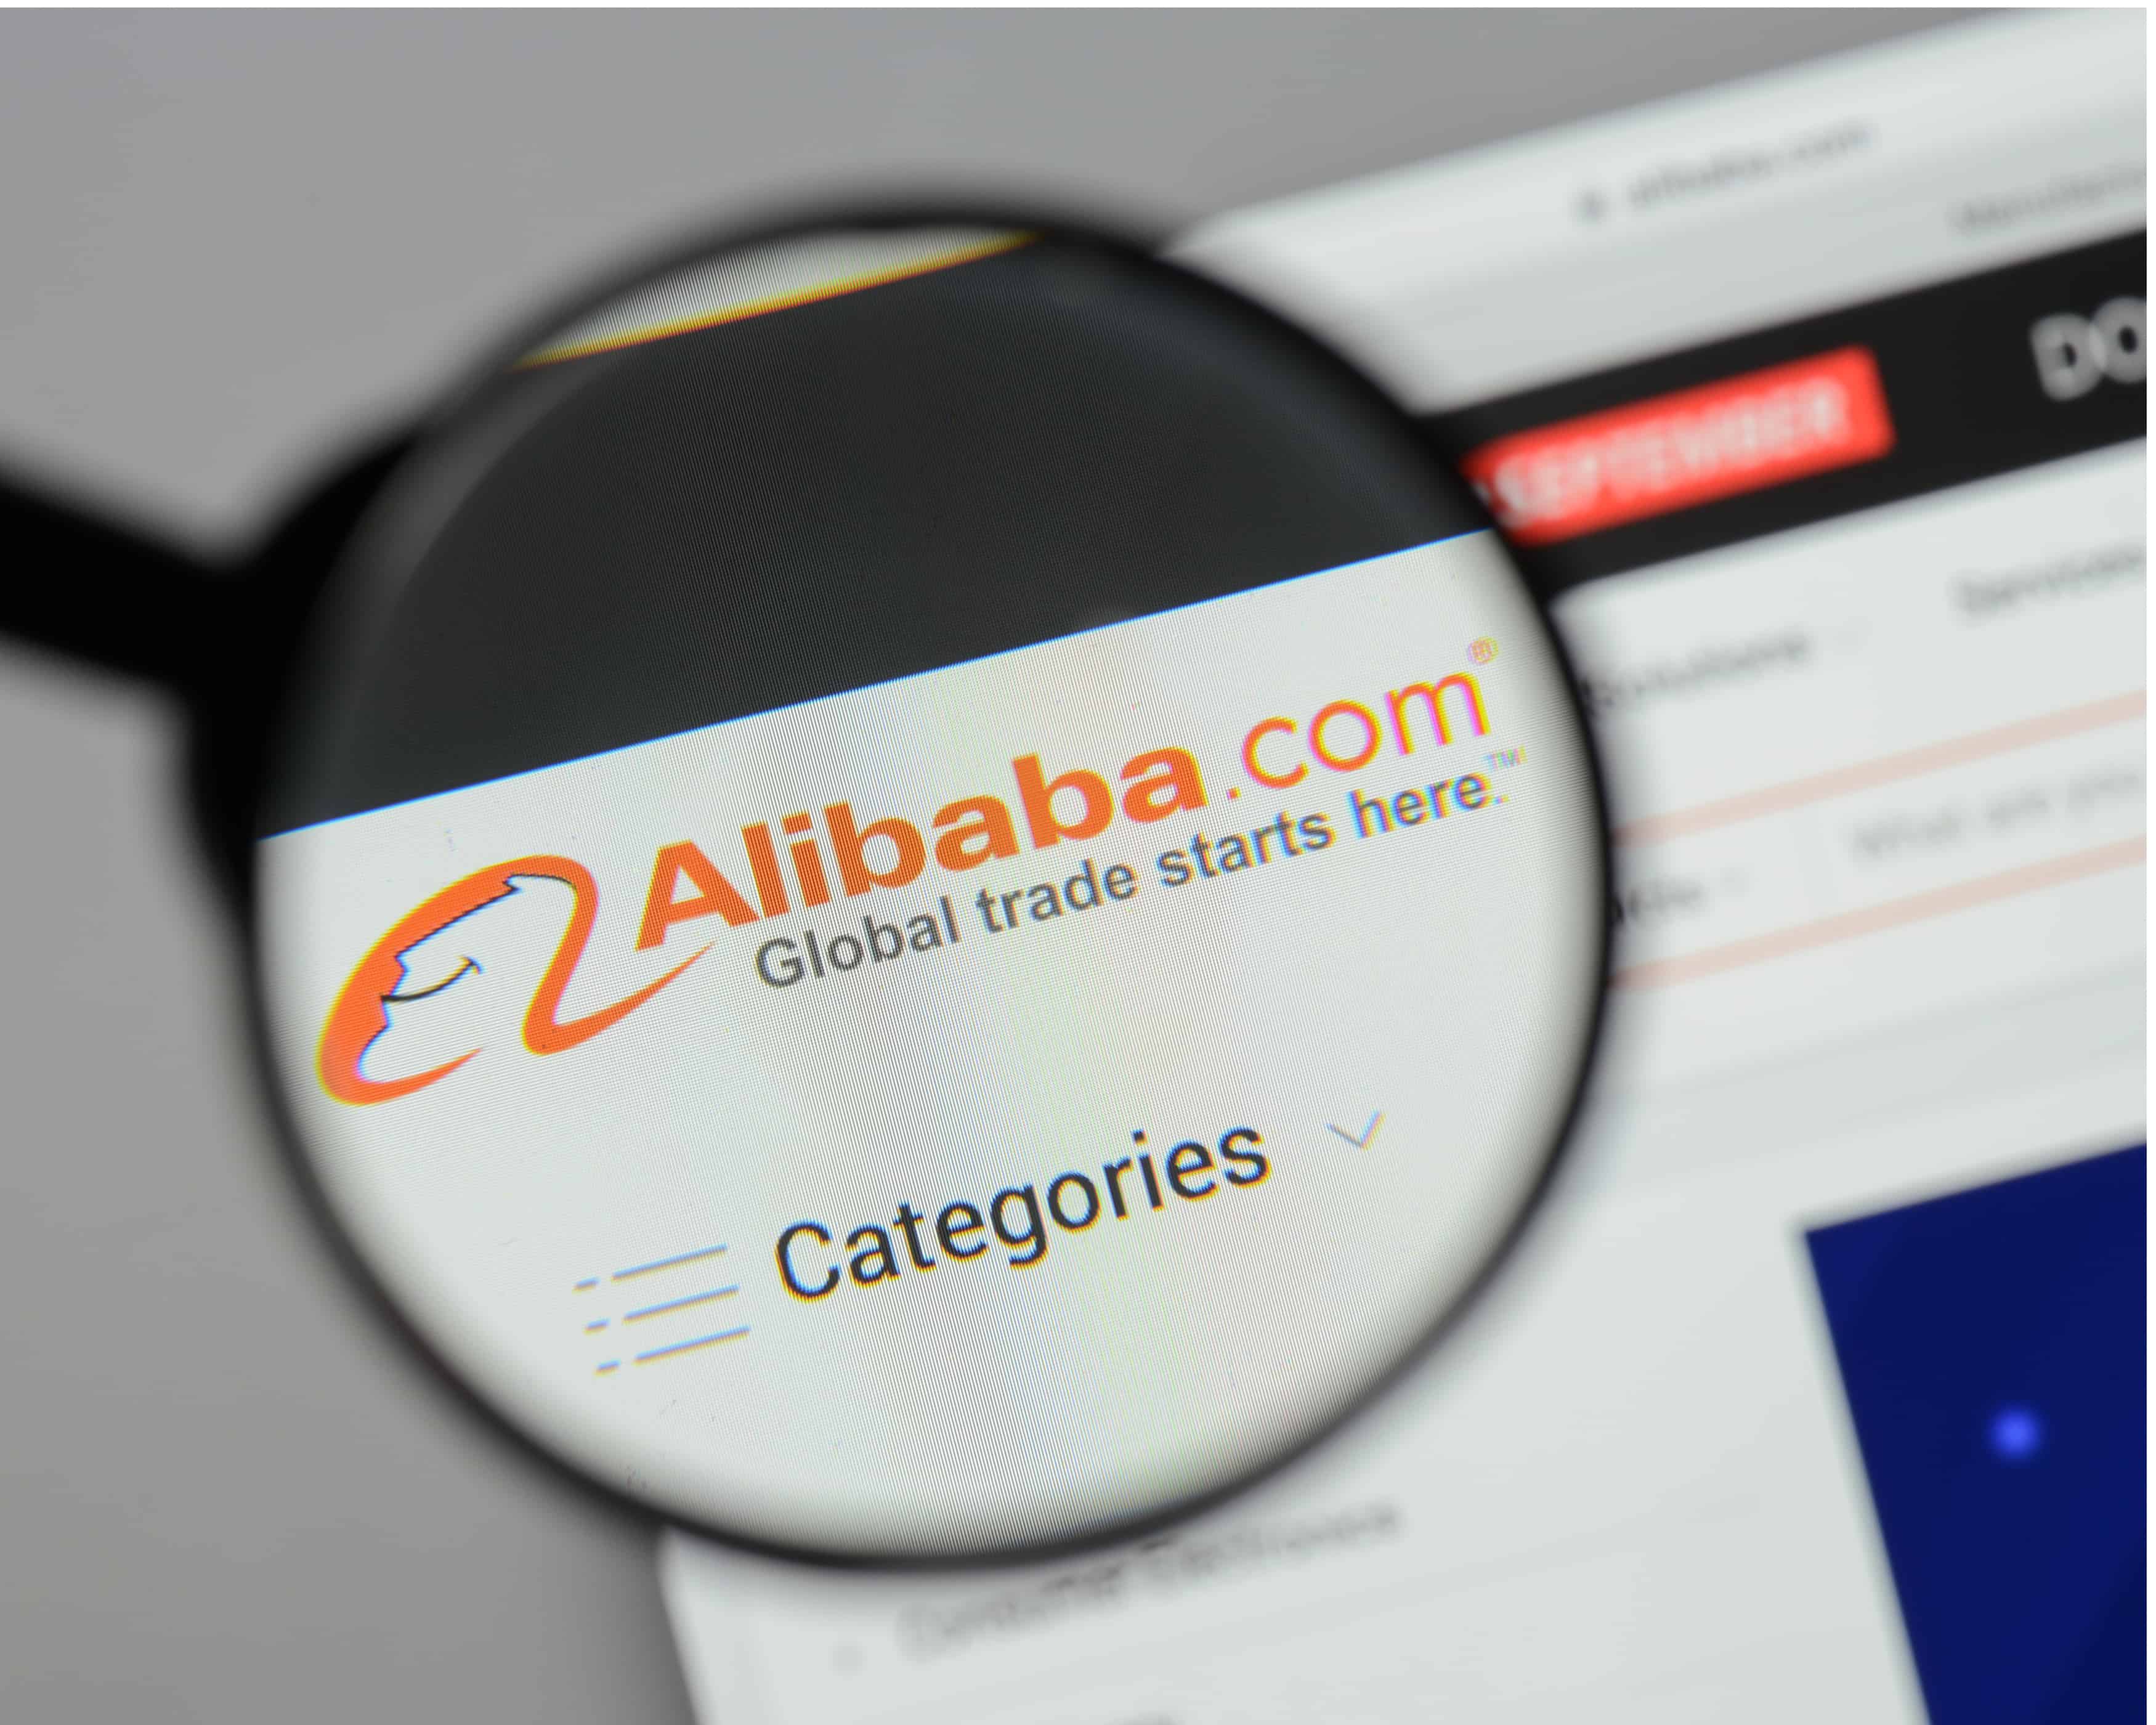 Seven reasons for Alibaba's success